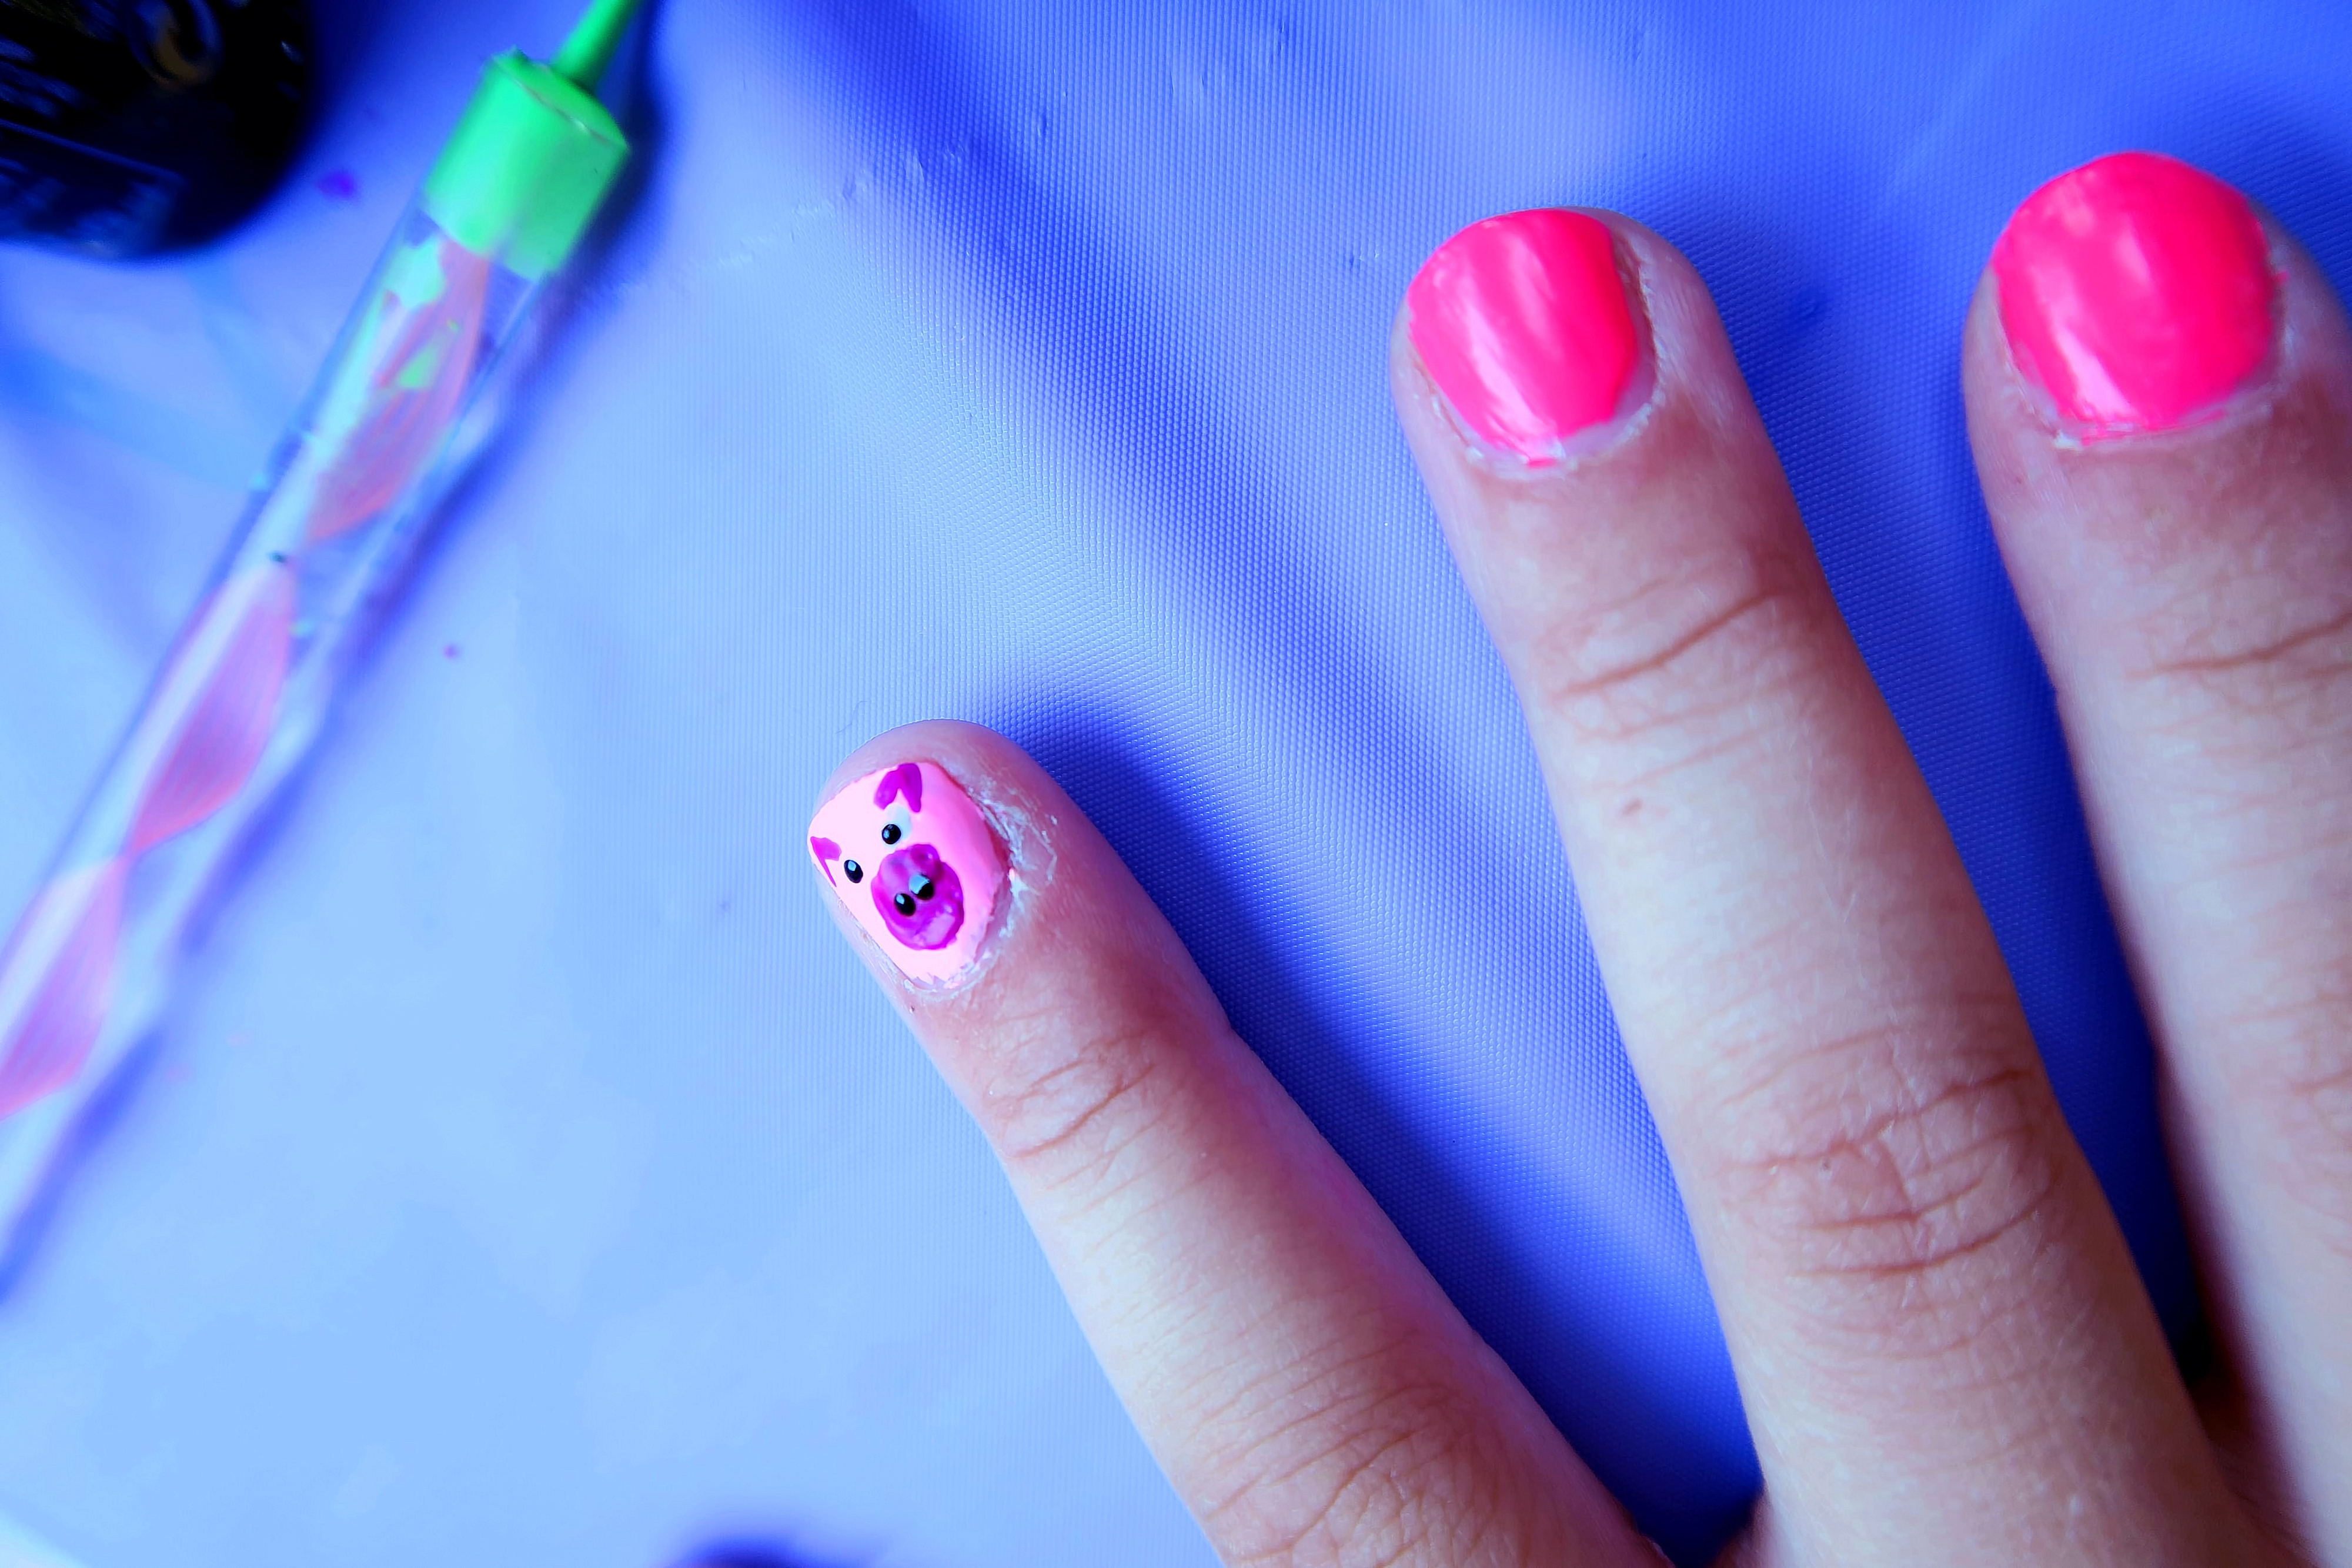 Hot Pink Nails With A Cute Piggy Graphic. 